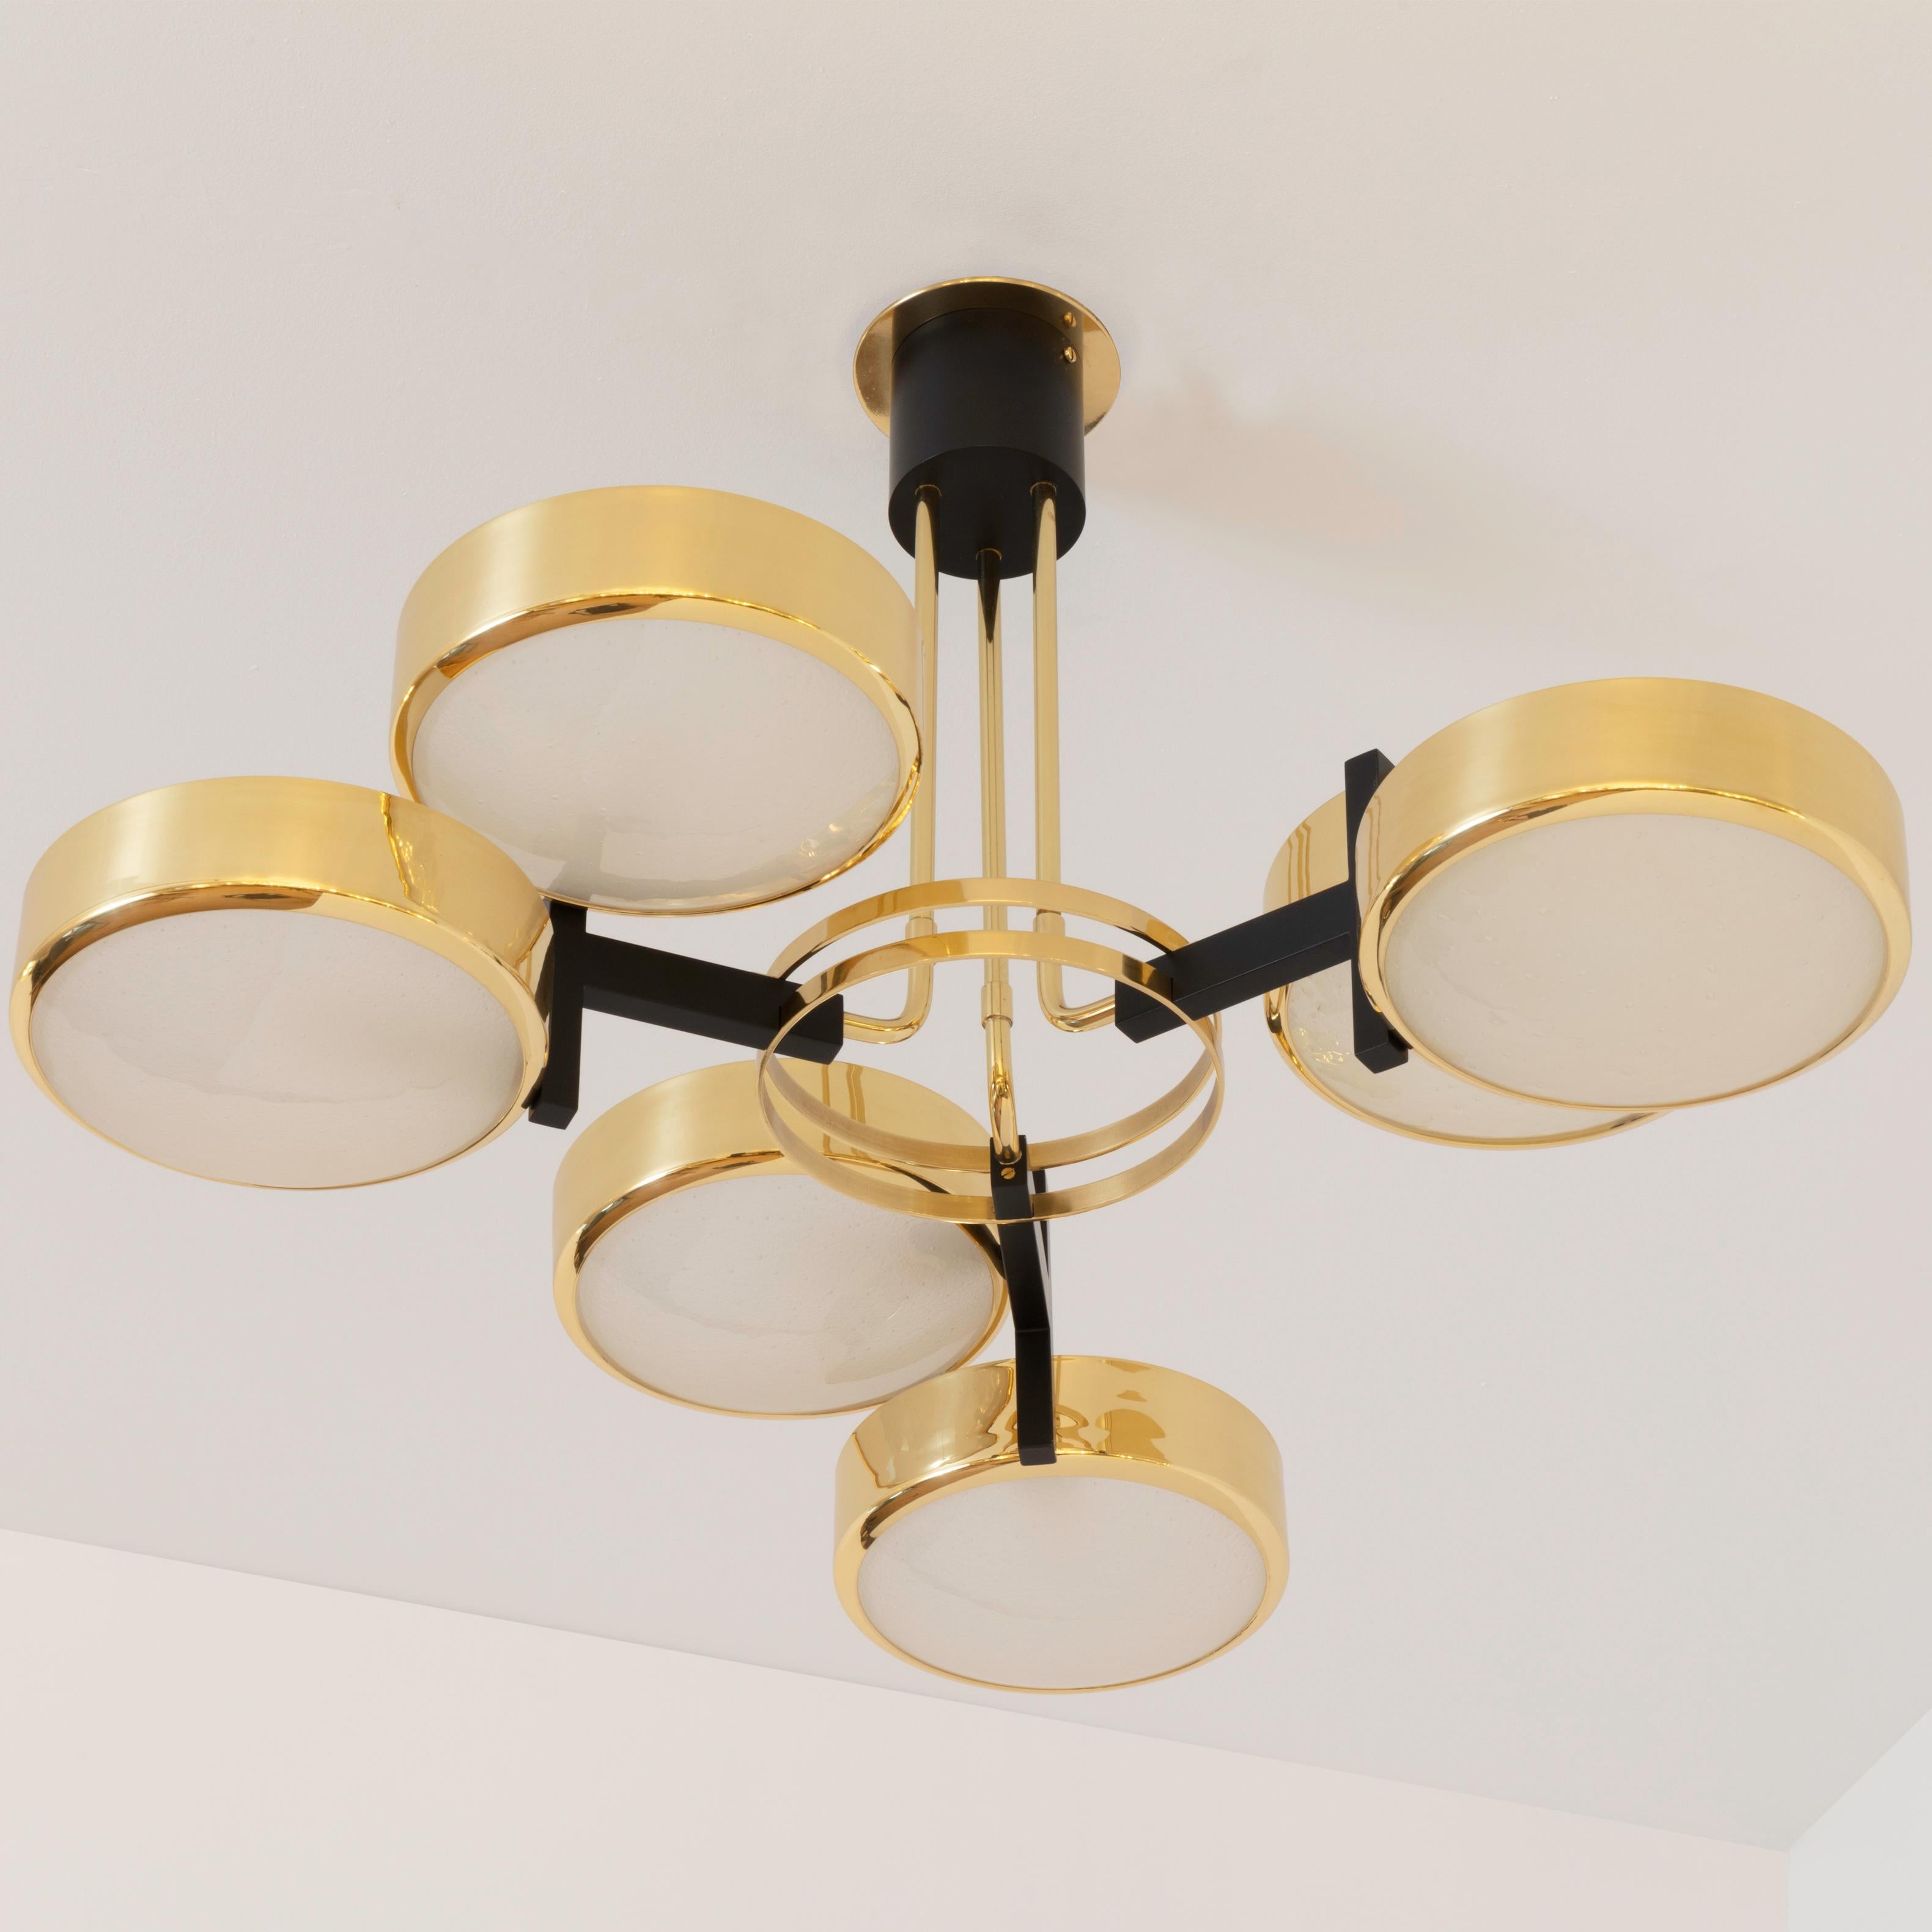 Modern Eclissi Ceiling Light by Gaspare Asaro-Polished Brass and Black Finish For Sale